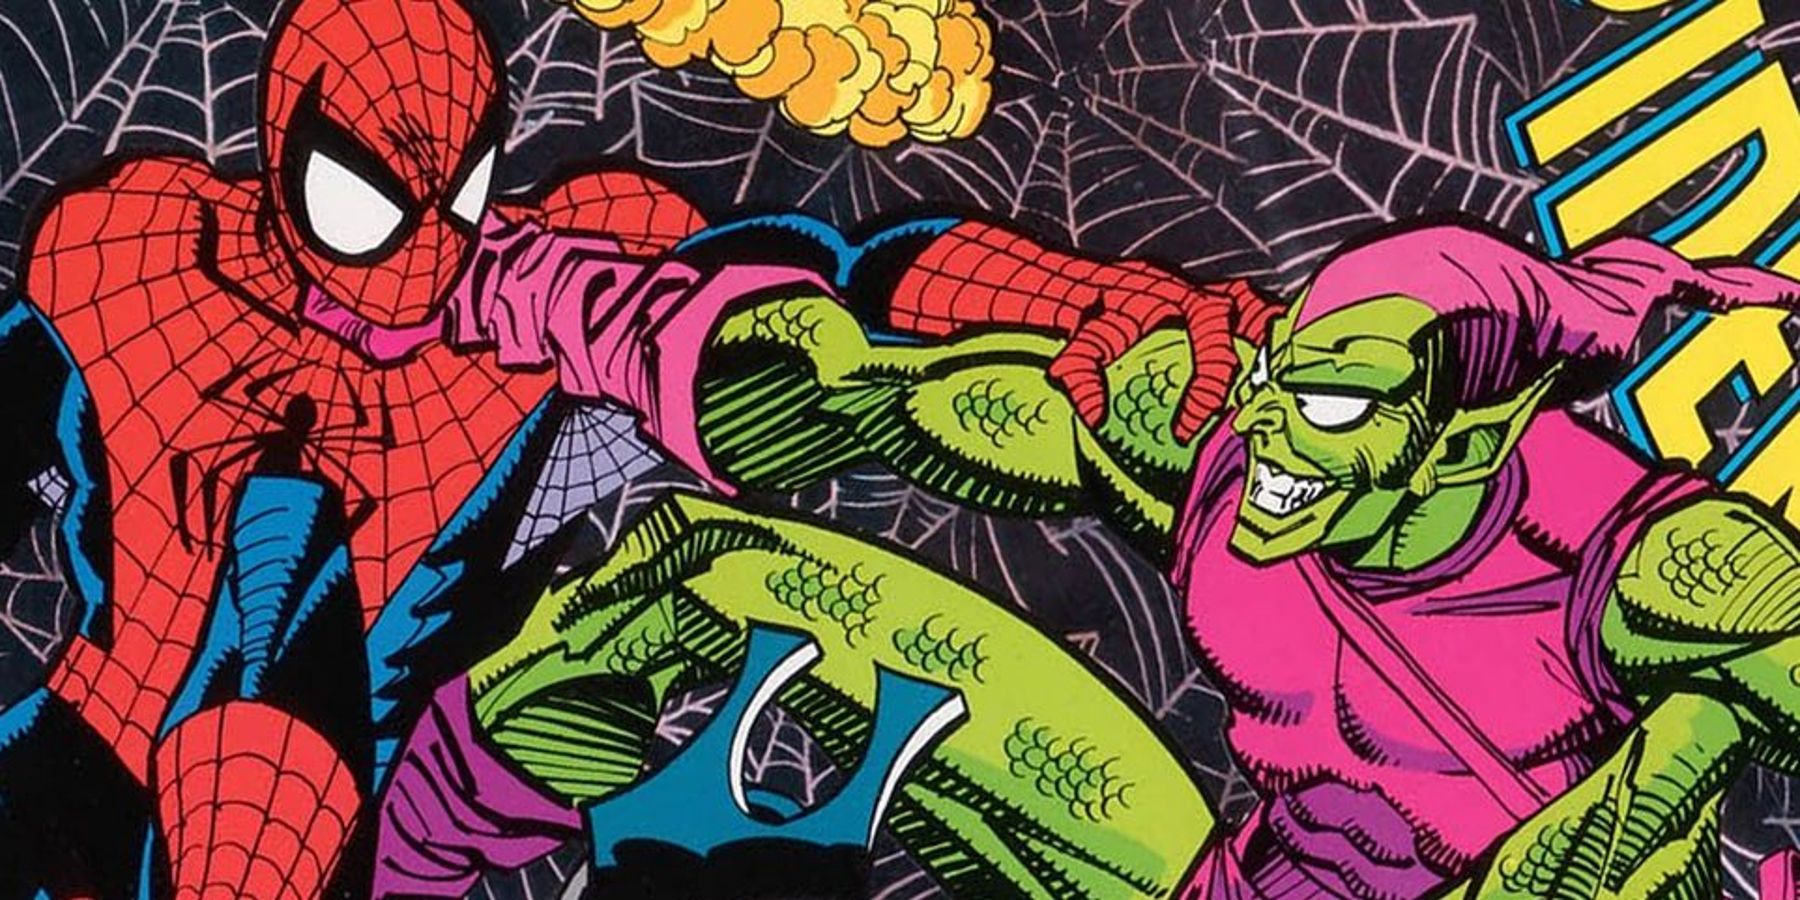 Spider-Man fighting Harry Osborn as the Green Goblin in the Amazing Spider-Man comics